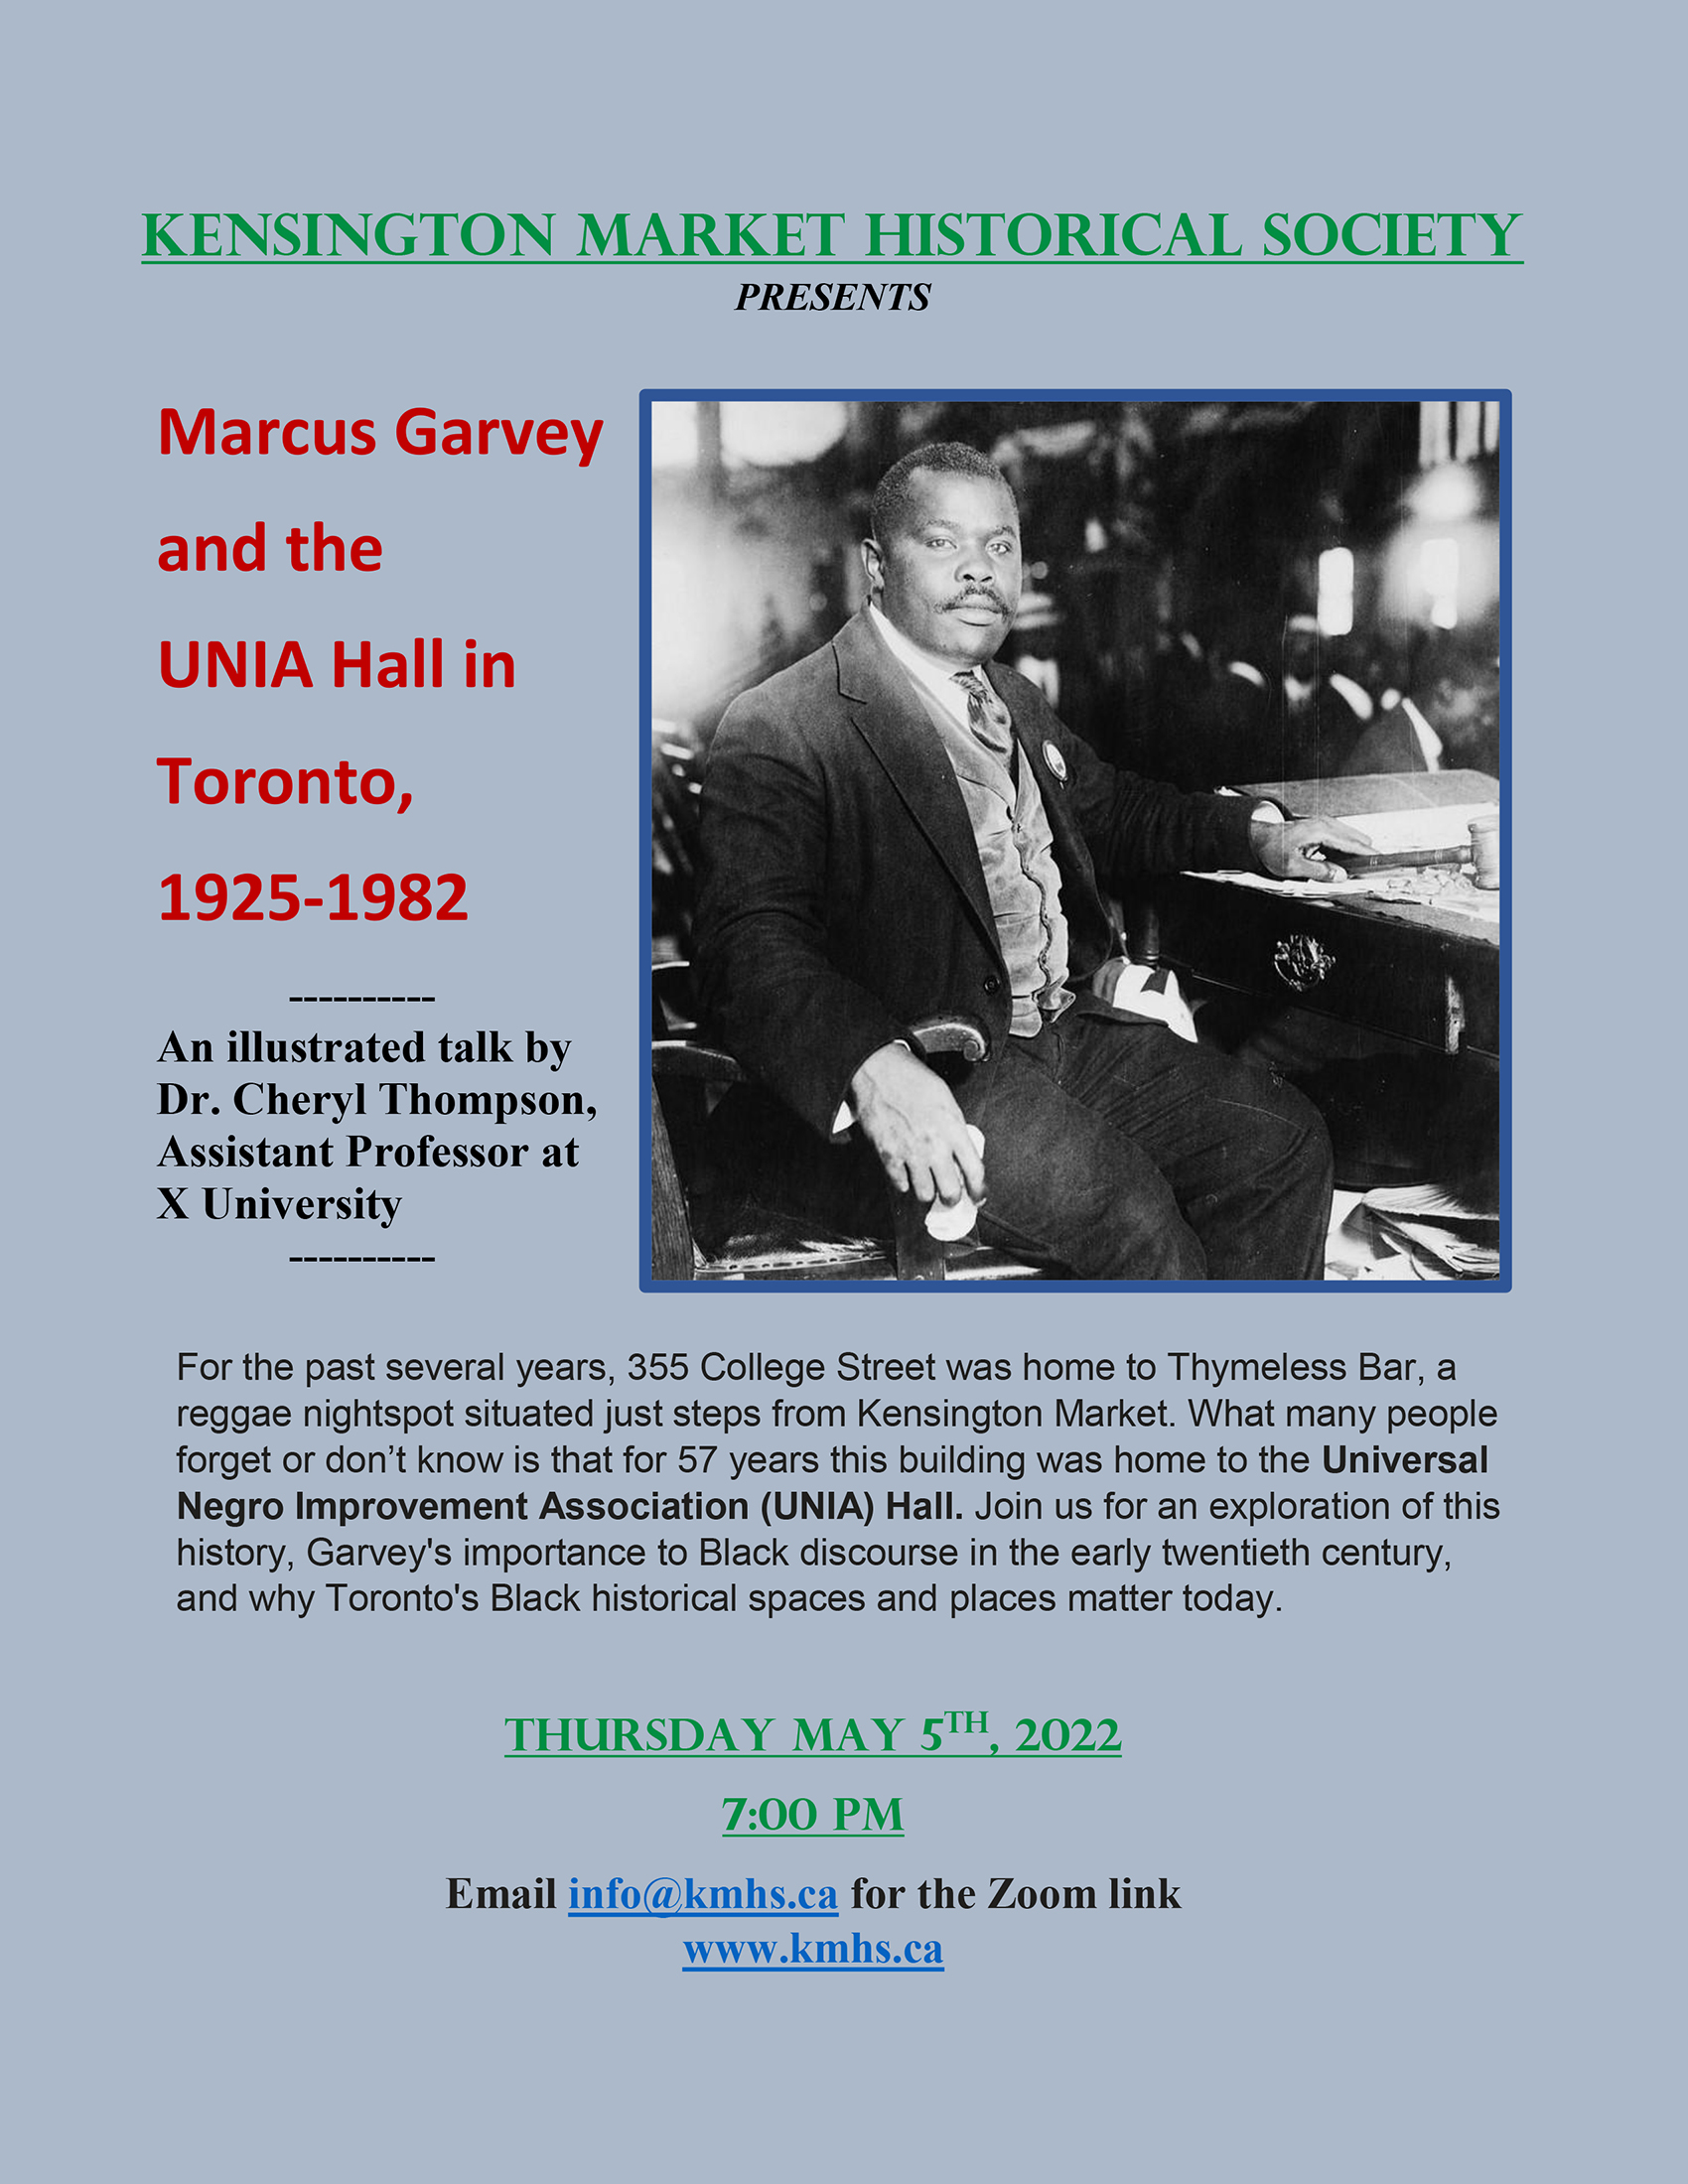 Marcus Garvey and the UNIA Hall in Toronto, 1925-1982